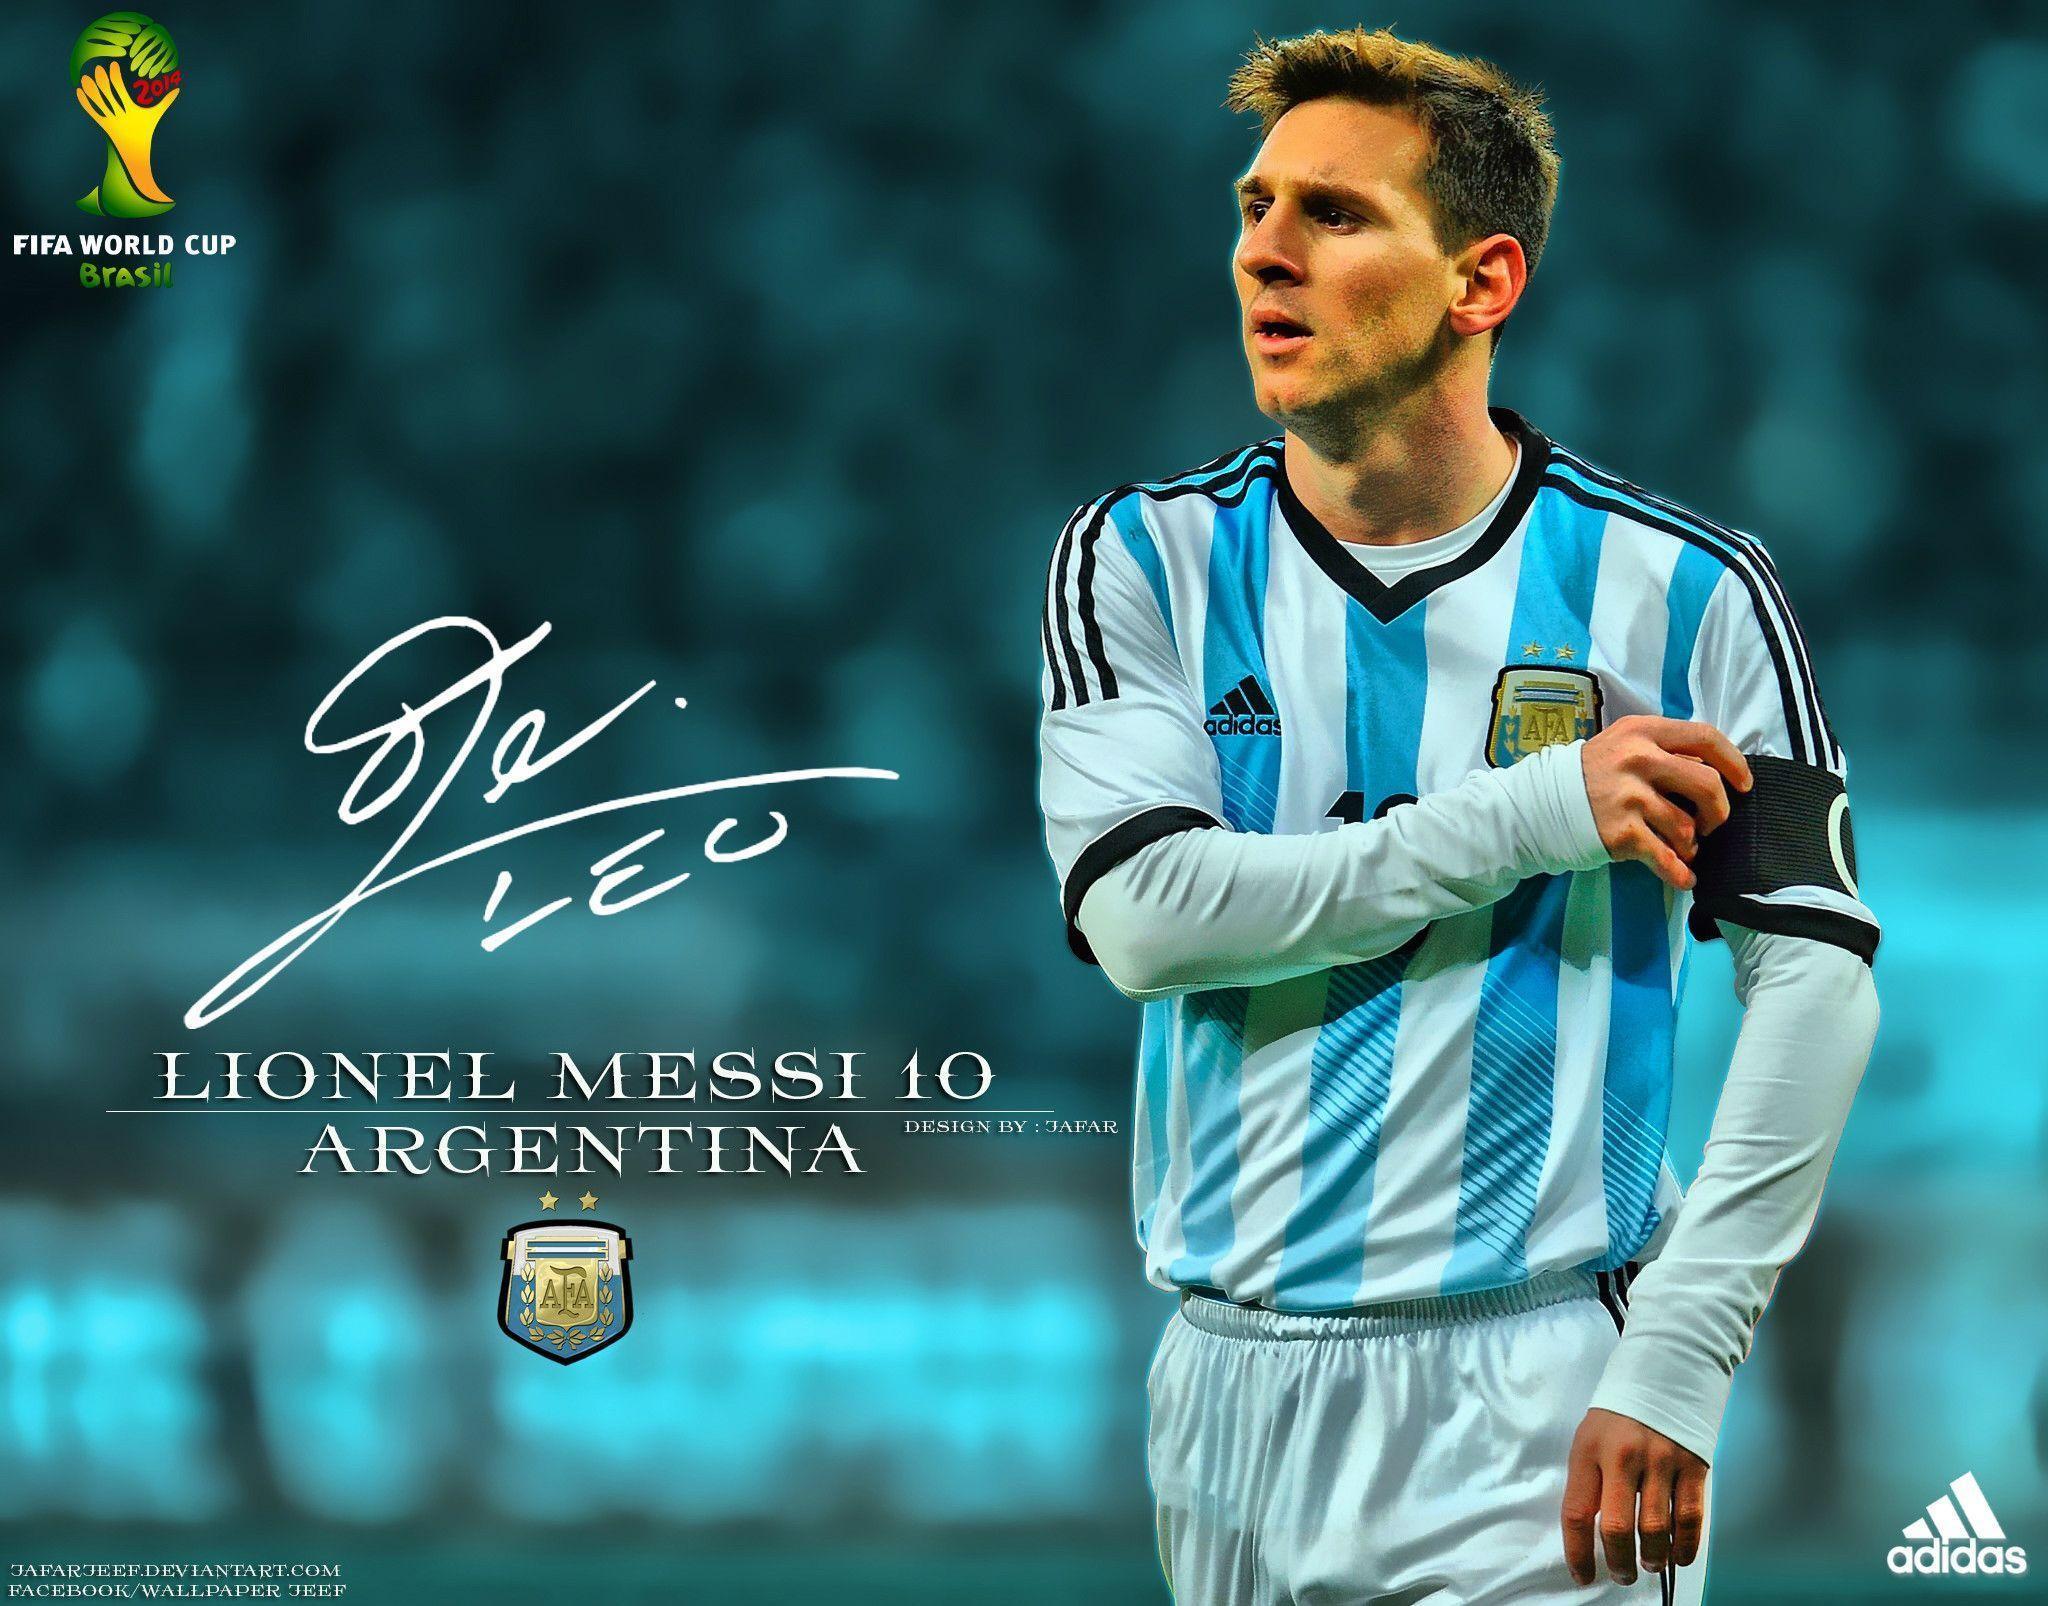 Lionel Messi 2016 Wallpapers Hd 1080p Wallpaper Cave 2704